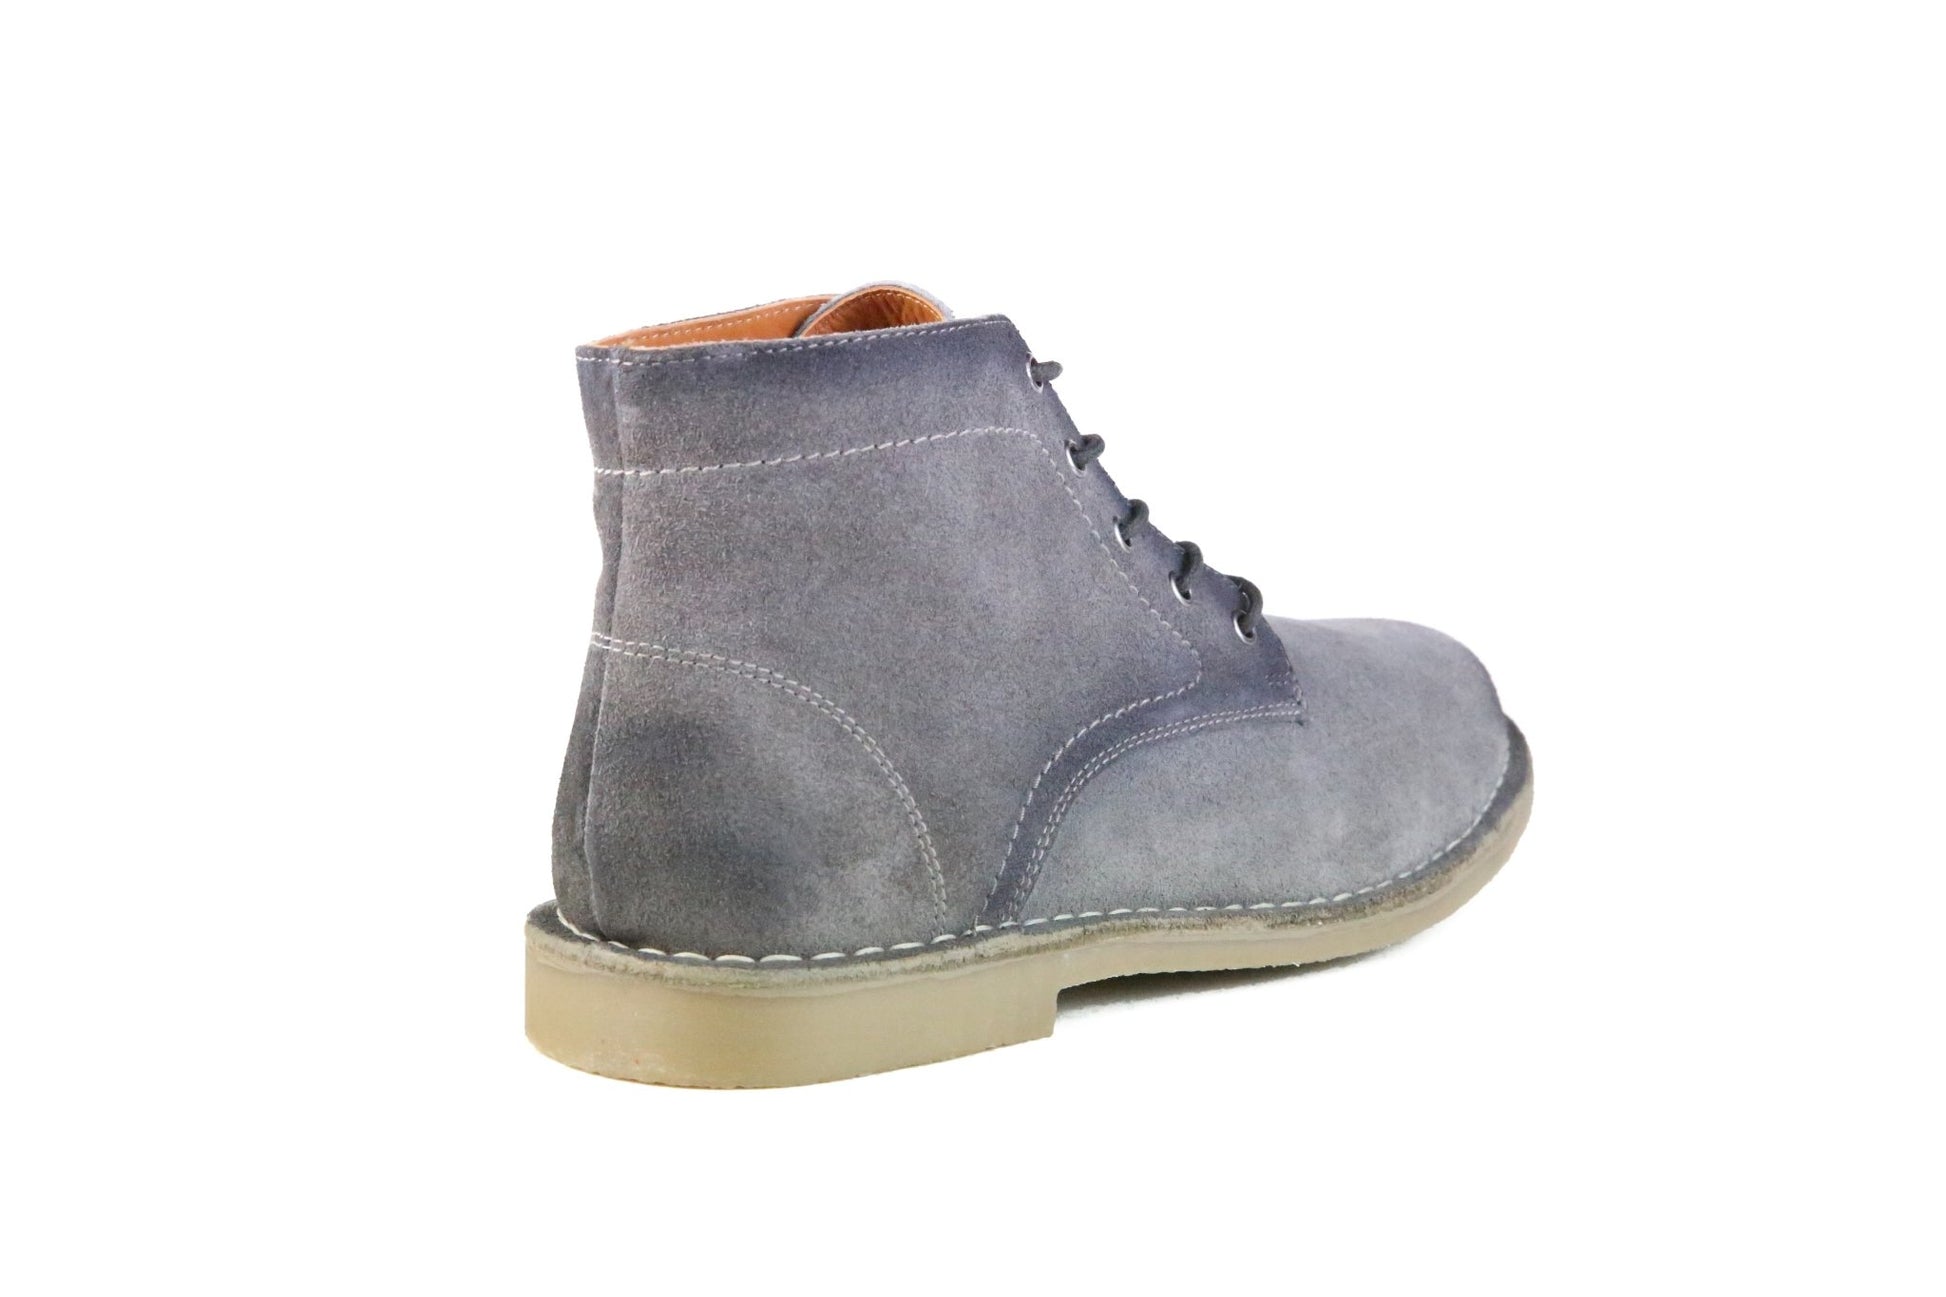 Hound & Hammer The Grover | Men's Burnished Grey Suede Ankle Boots - Men - Footwear - Boots - Ankle Boots - Benn~Burry